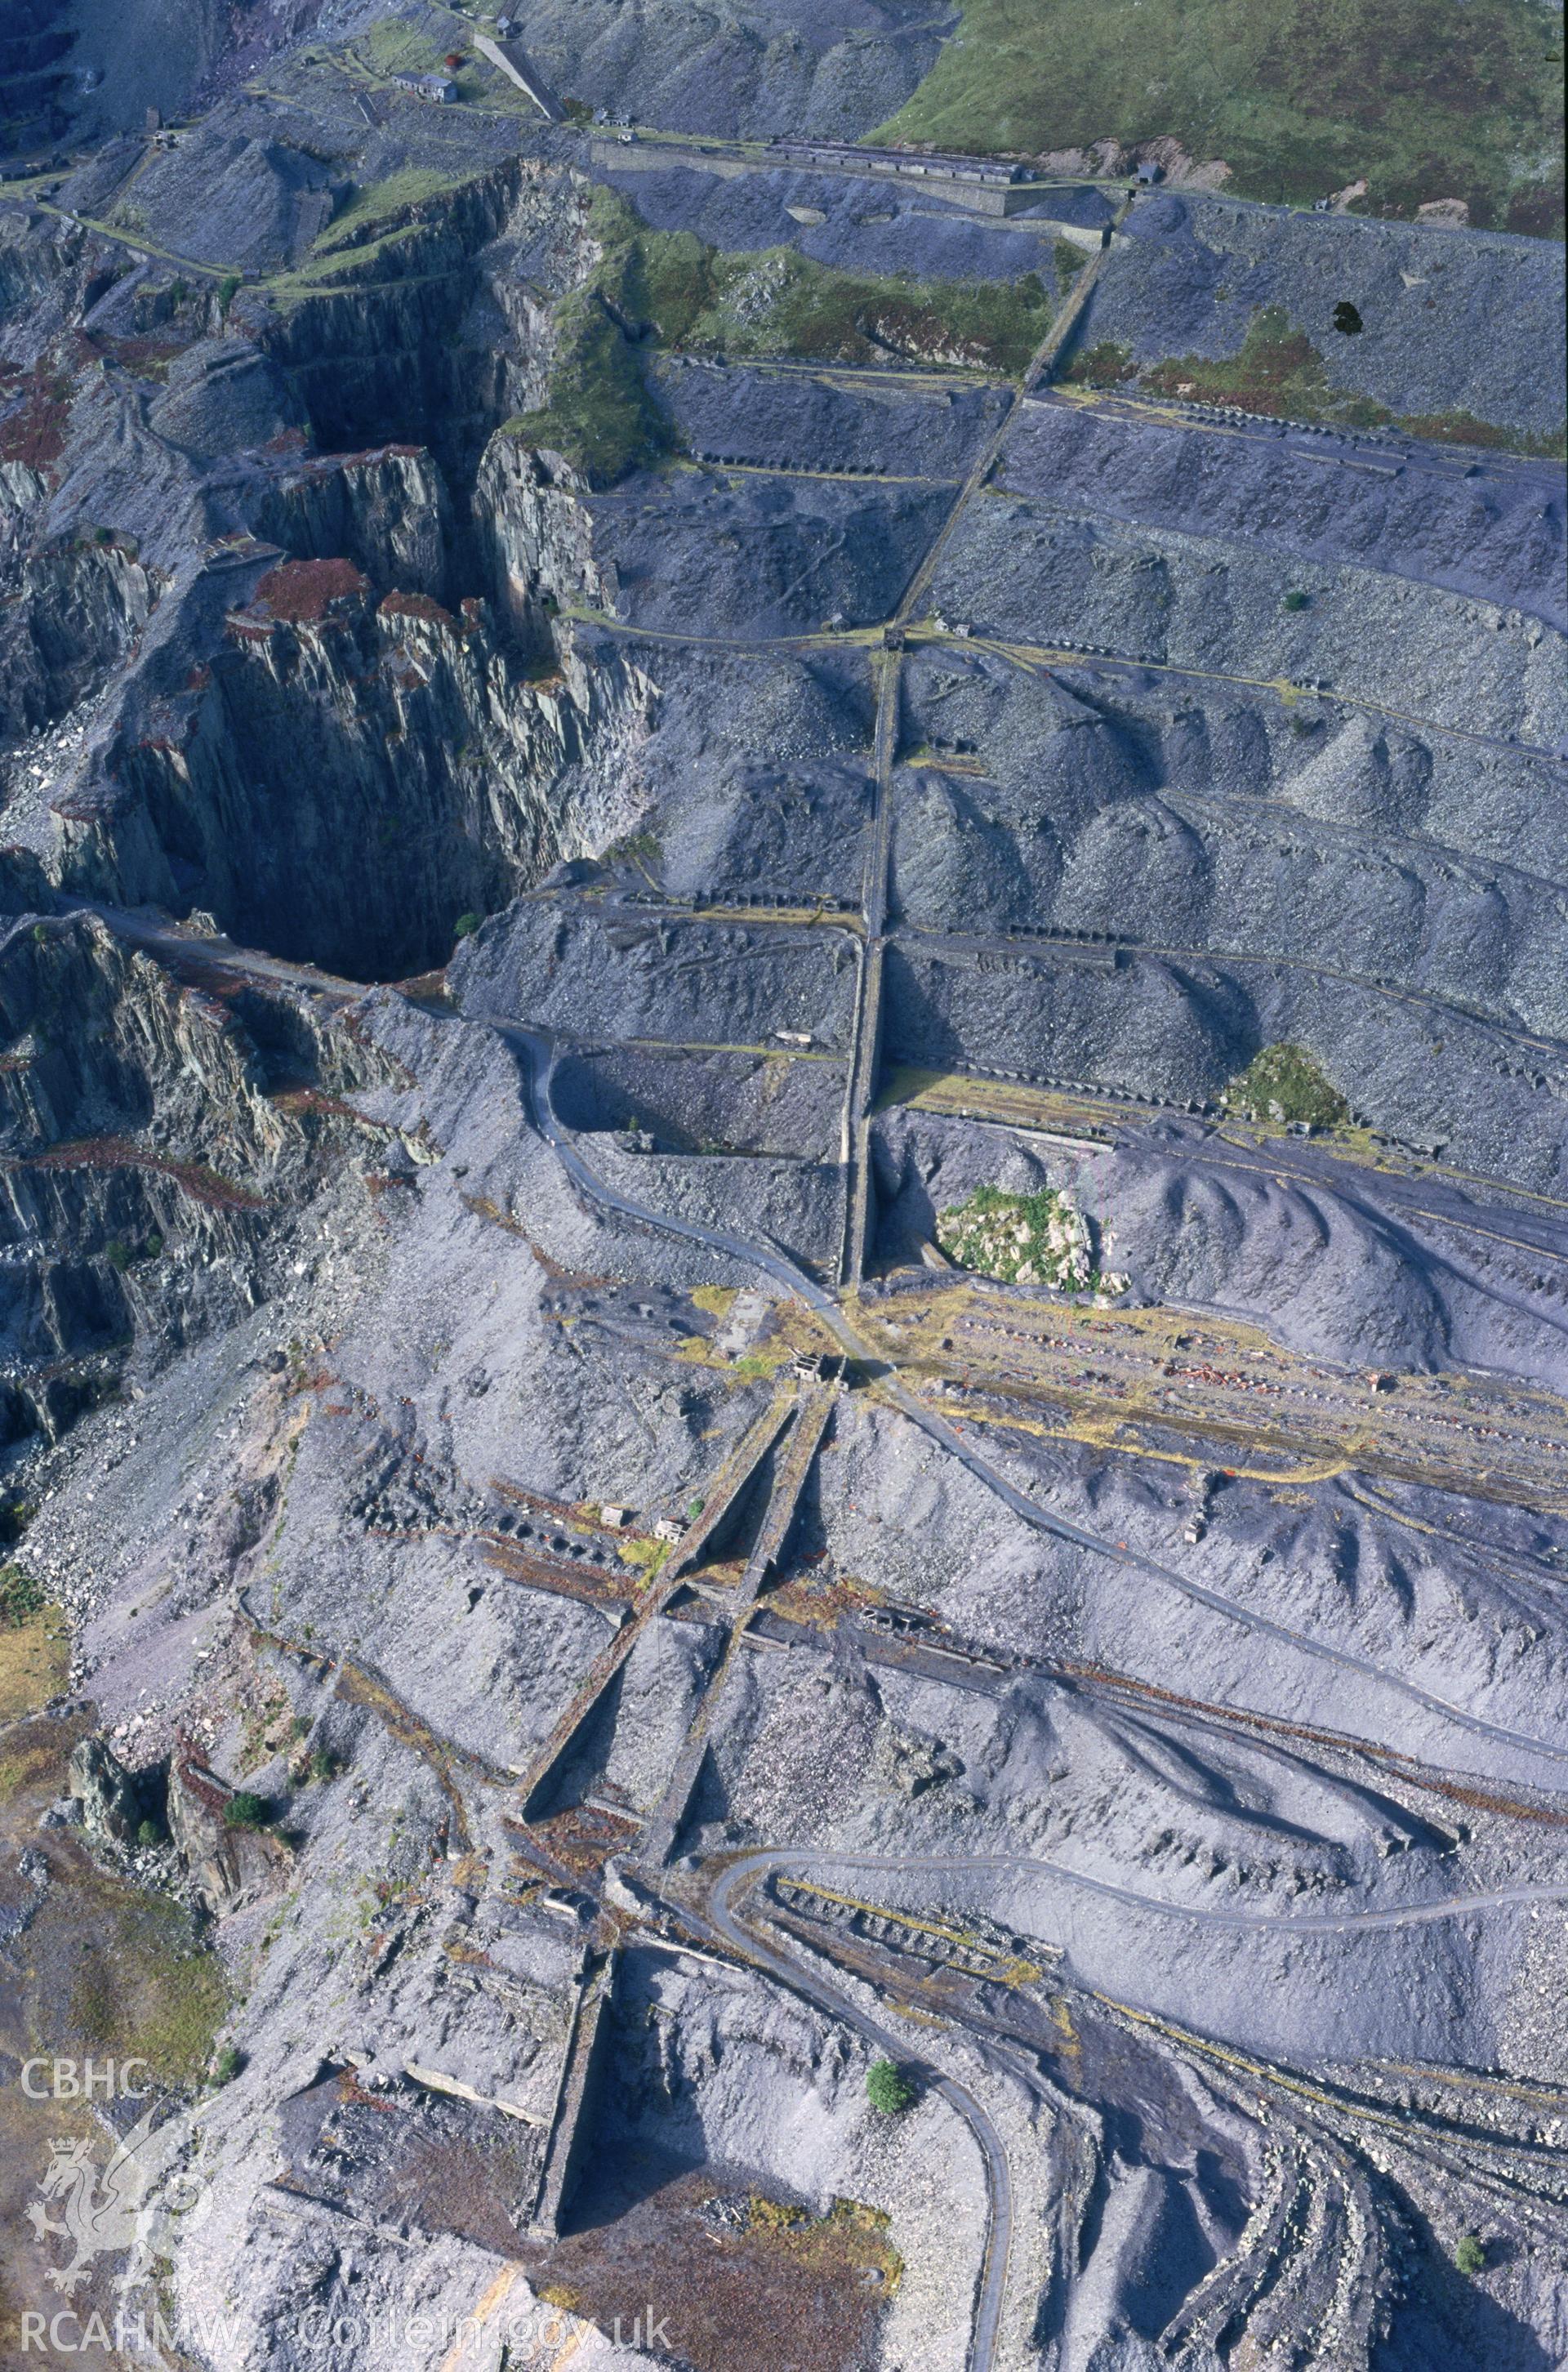 Slide of RCAHMW colour oblique aerial photograph of Dinorwic Slate Quarry, taken by T.G. Driver, 20/8/1999.